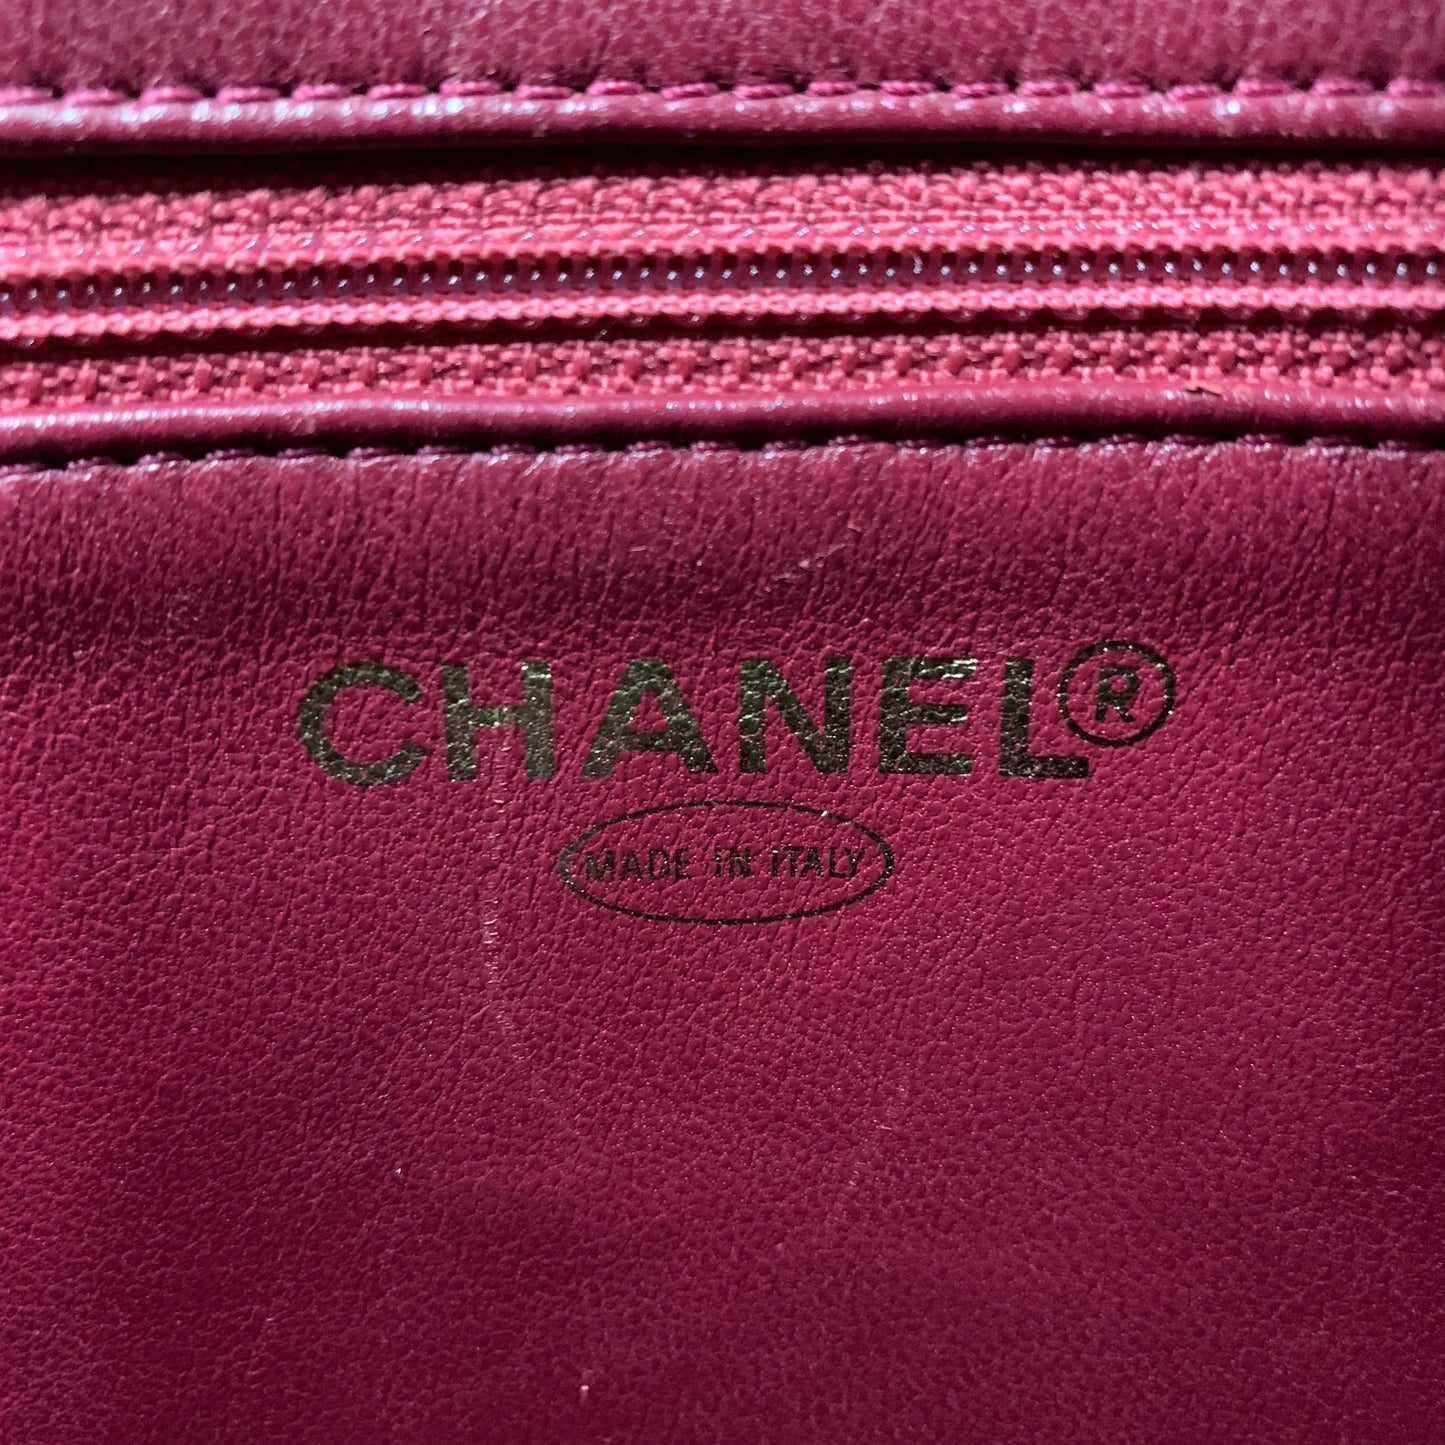 Authentic Chanel Cranberry Medallion Tote